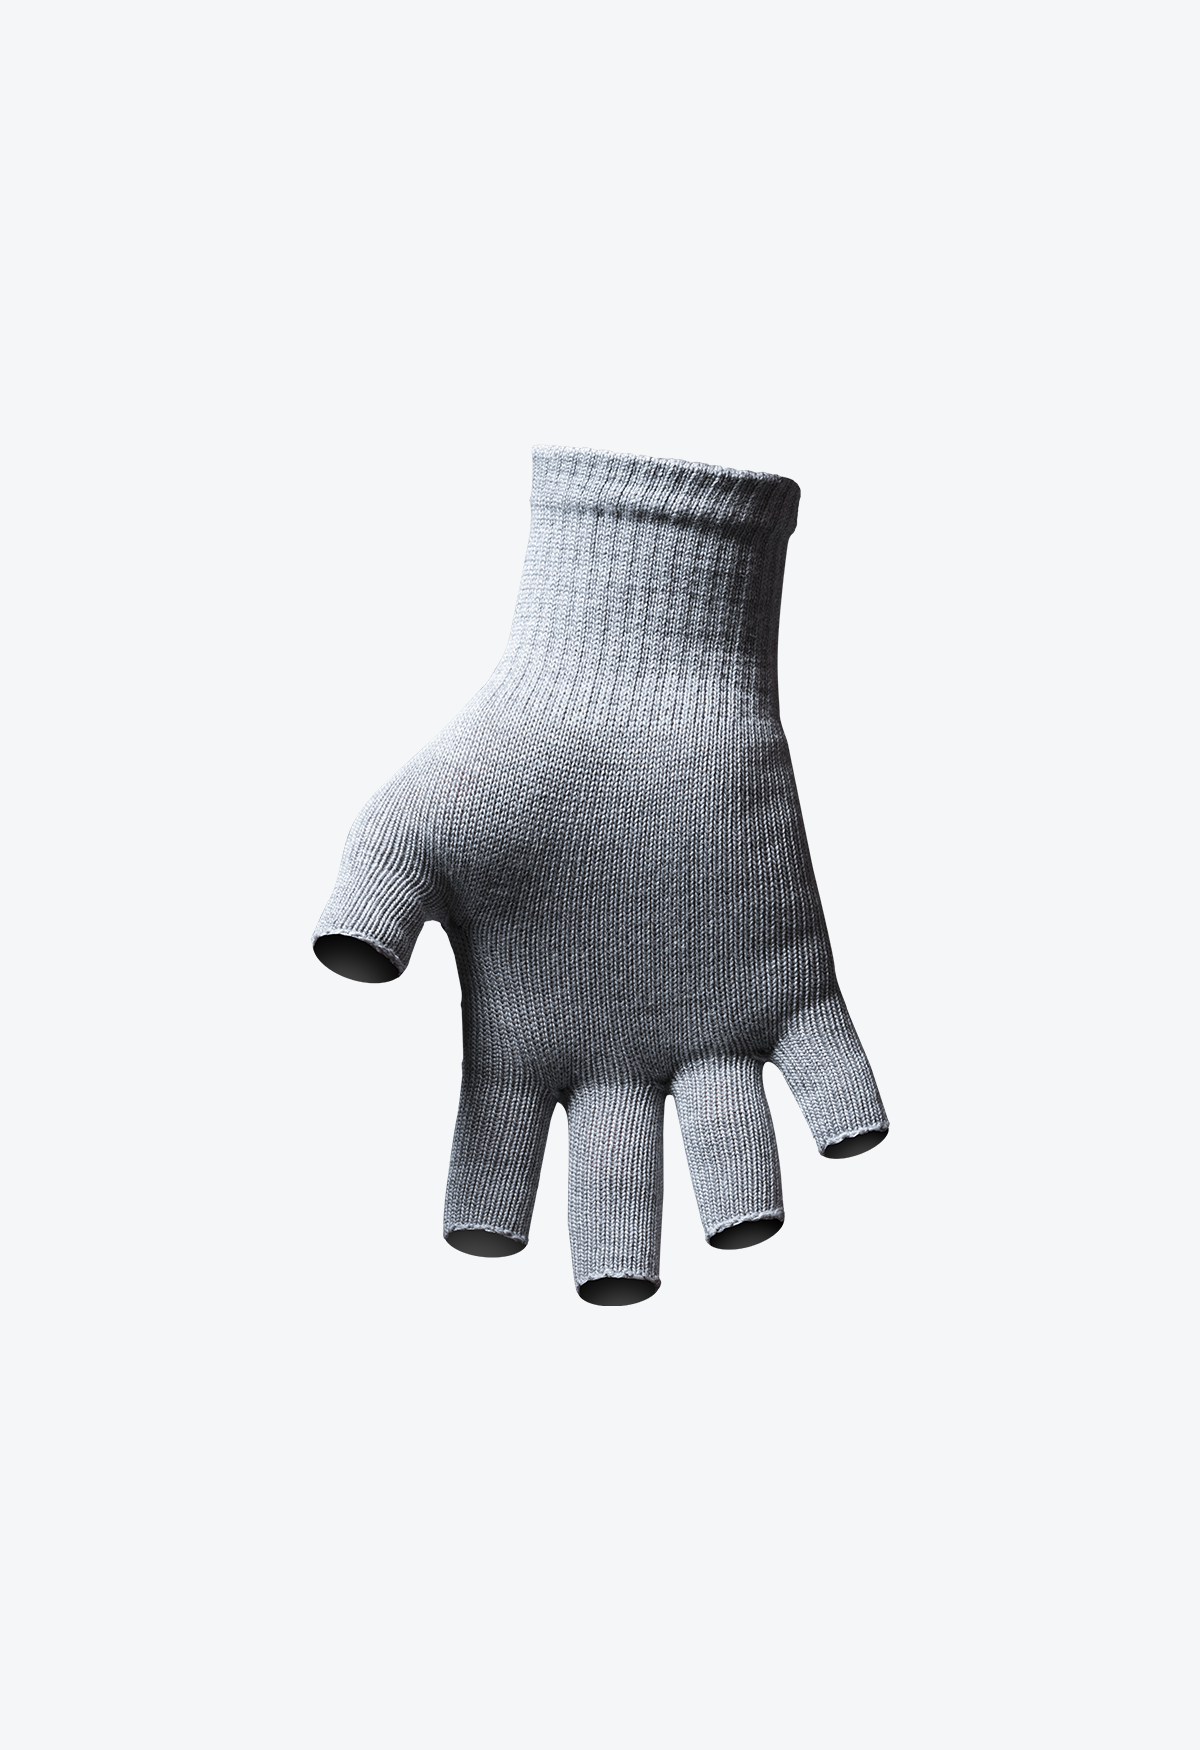 What is the large black mitten like object over hand of the